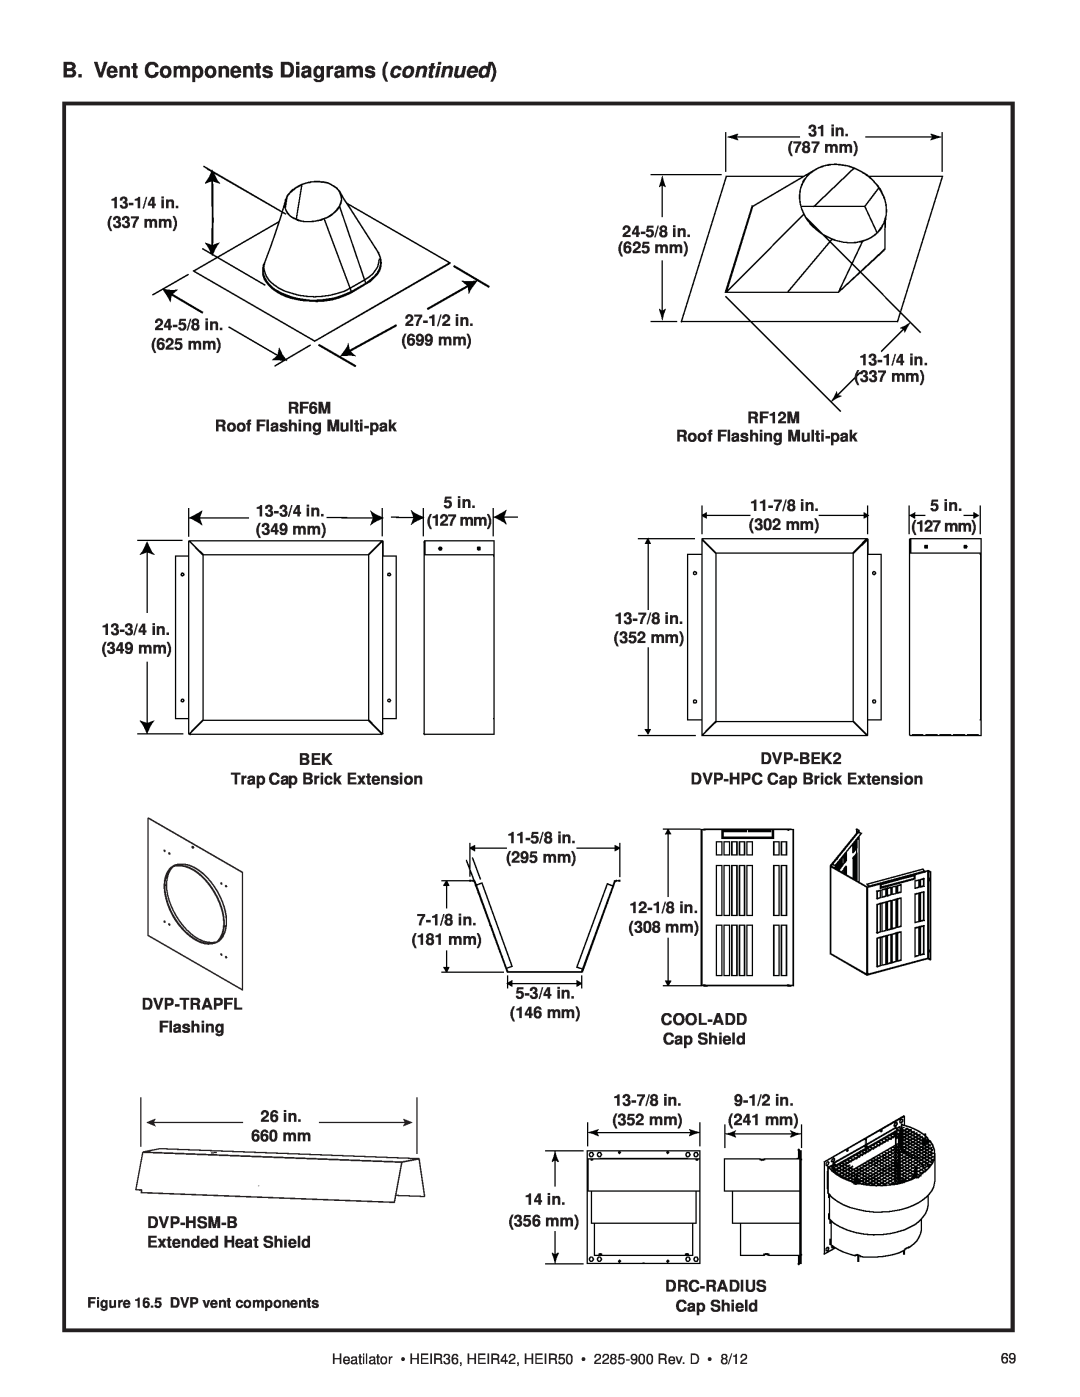 Heatiator HEIR36H B. Vent Components Diagrams continued, 31 in, 787 mm, 13-1/4in, 24-5/8in, 625 mm, 27-1/2in, 699 mm, RF6M 